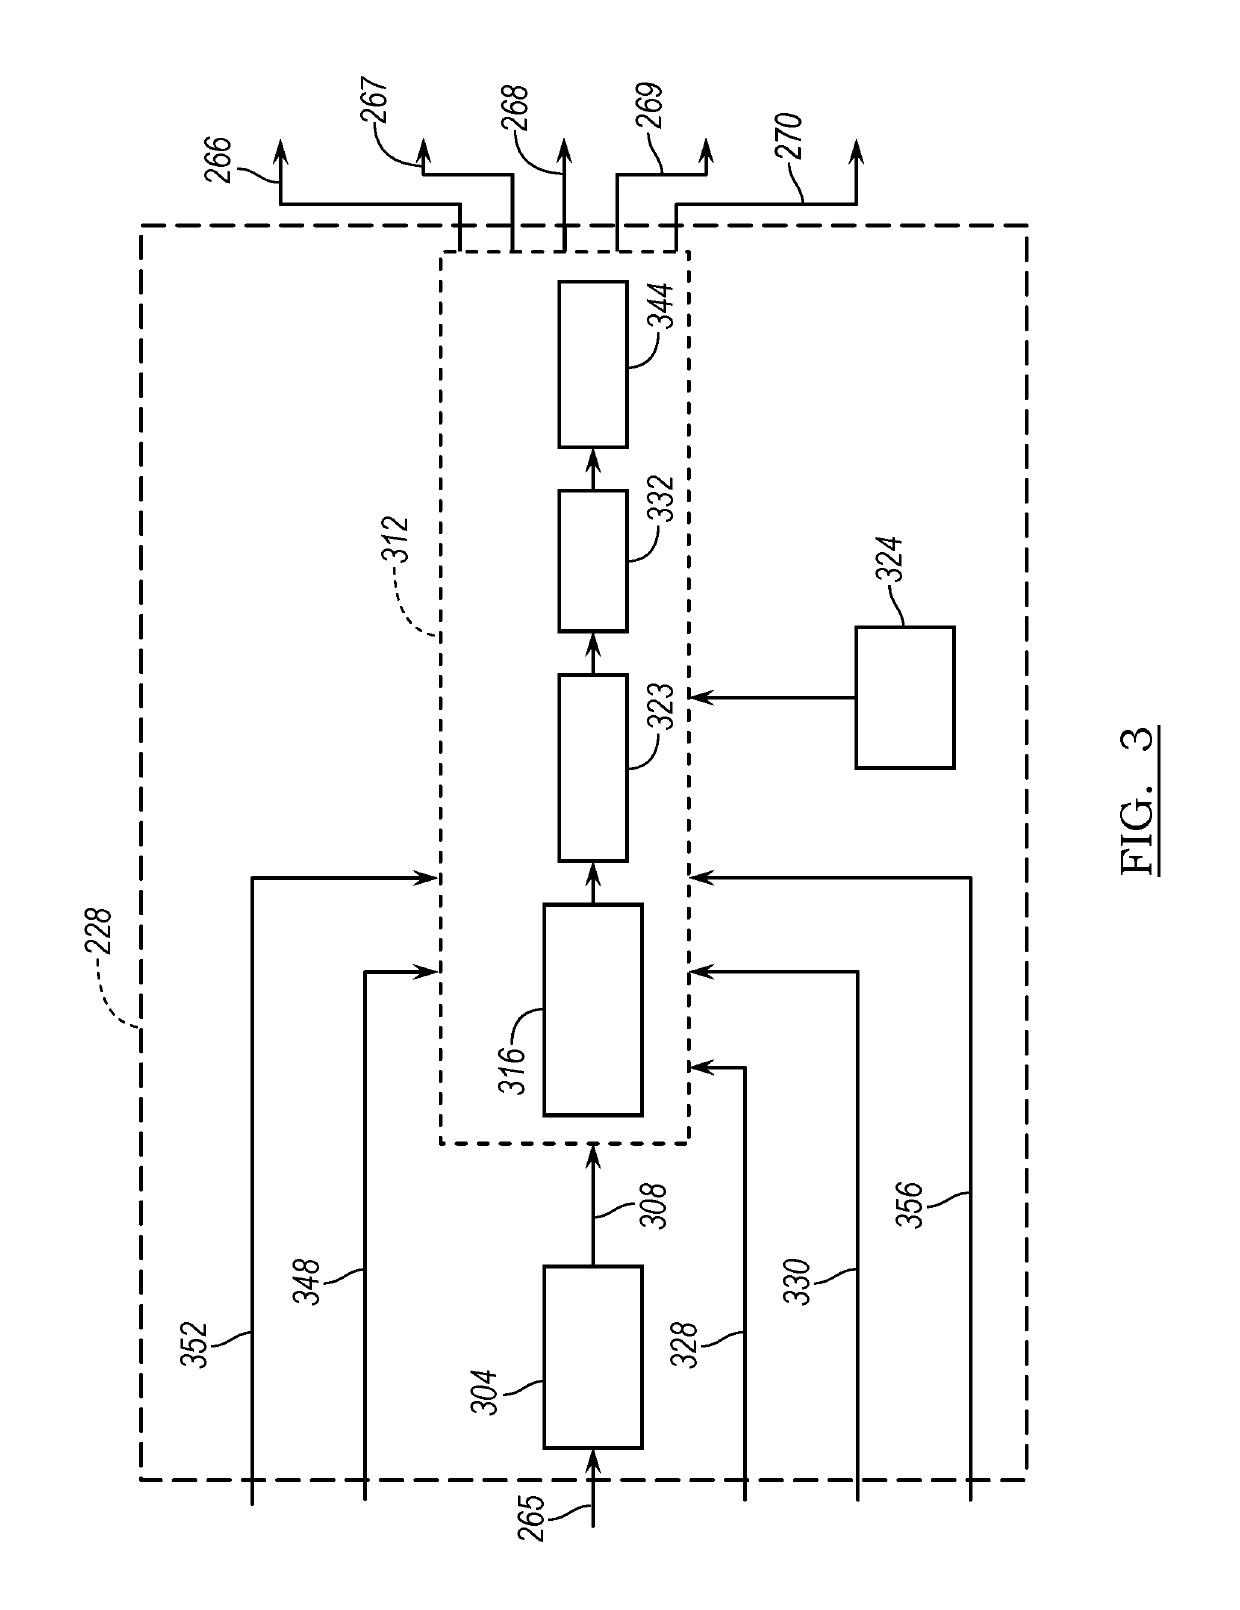 Method of cam phase control based on cylinder wall temperature